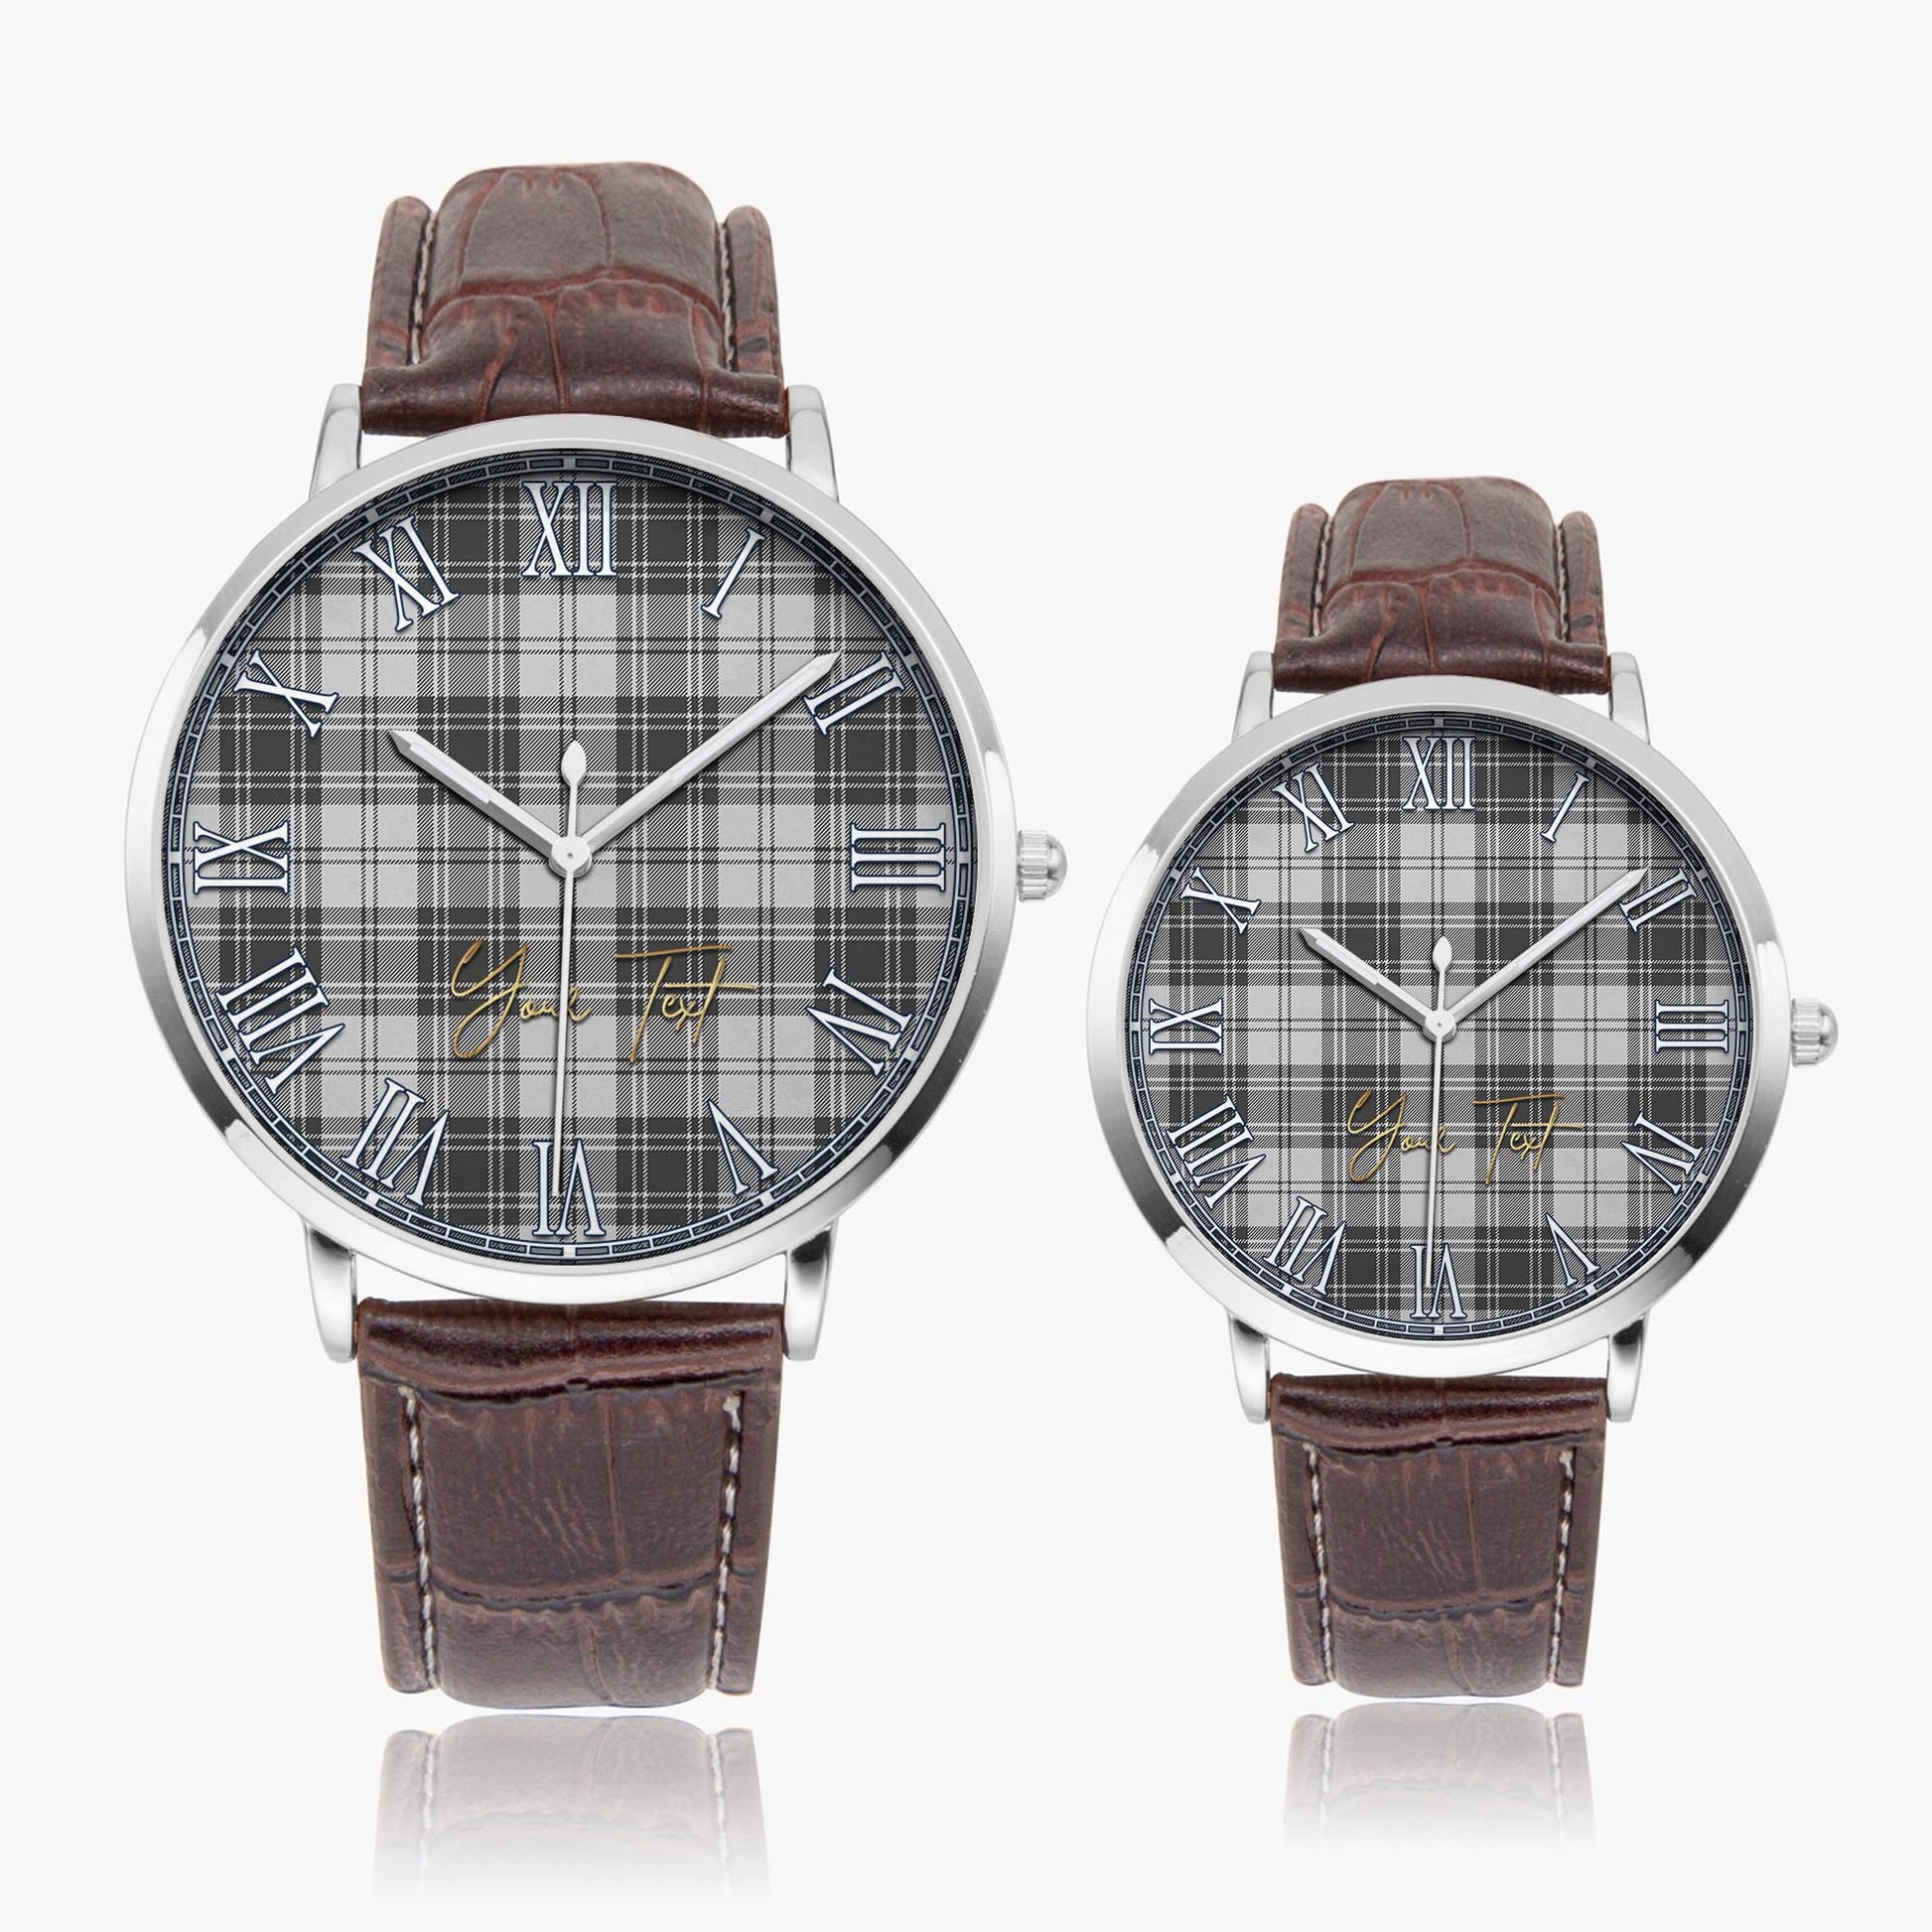 Glen Tartan Personalized Your Text Leather Trap Quartz Watch Ultra Thin Silver Case With Brown Leather Strap - Tartanvibesclothing